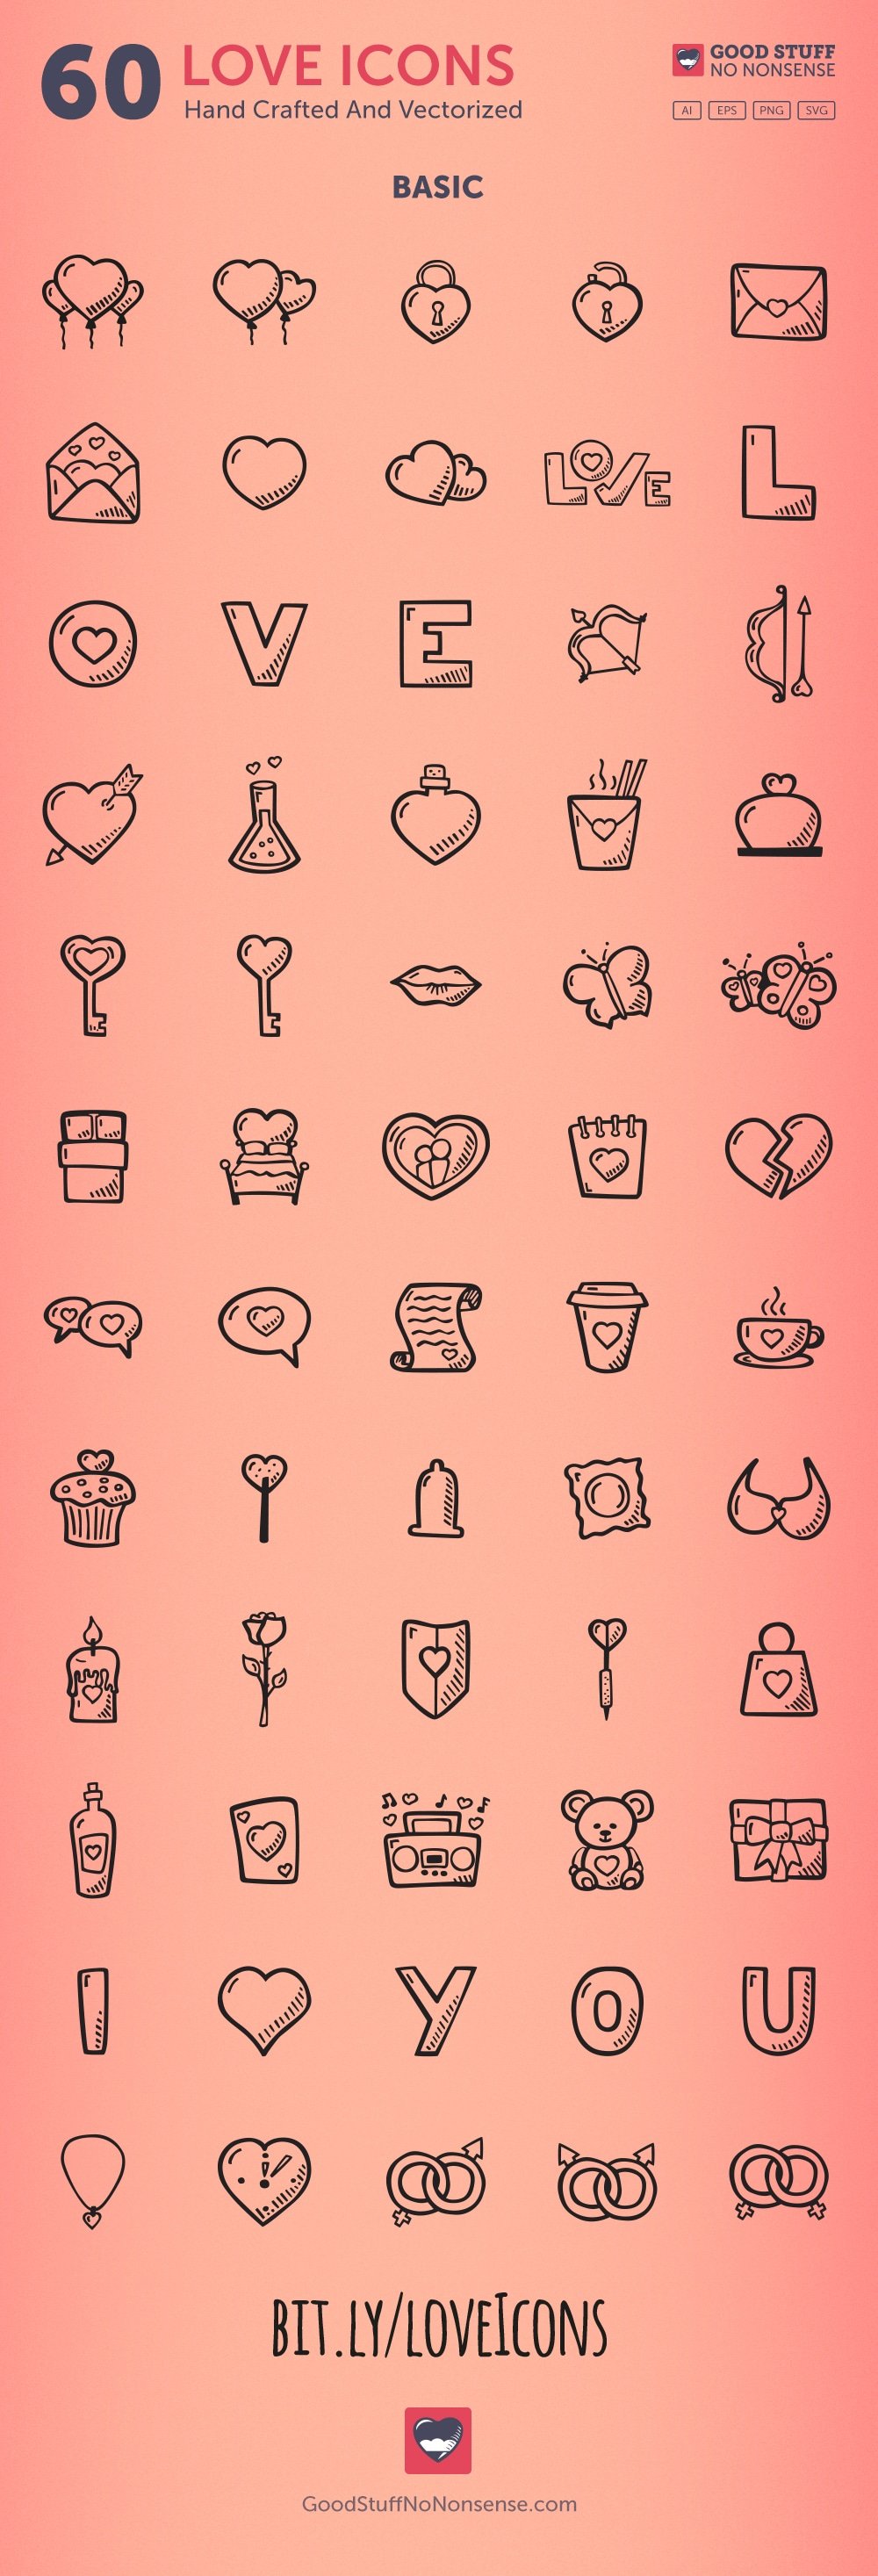 A set of 60 different basic black hand drawn icons on a pink background.